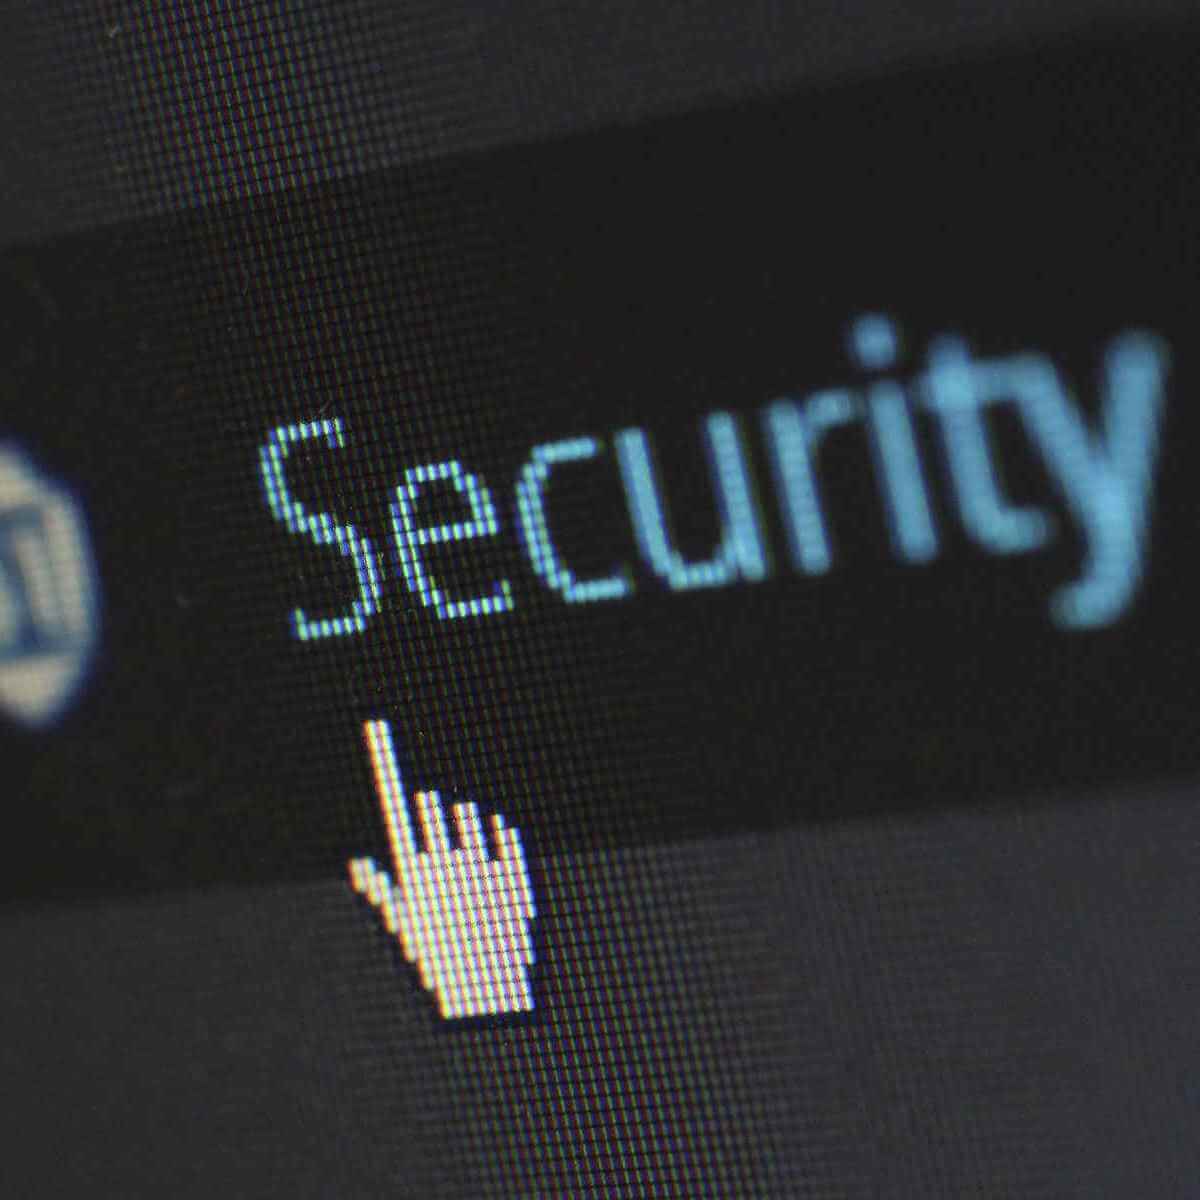 experts on demand offers an extra-layer of security